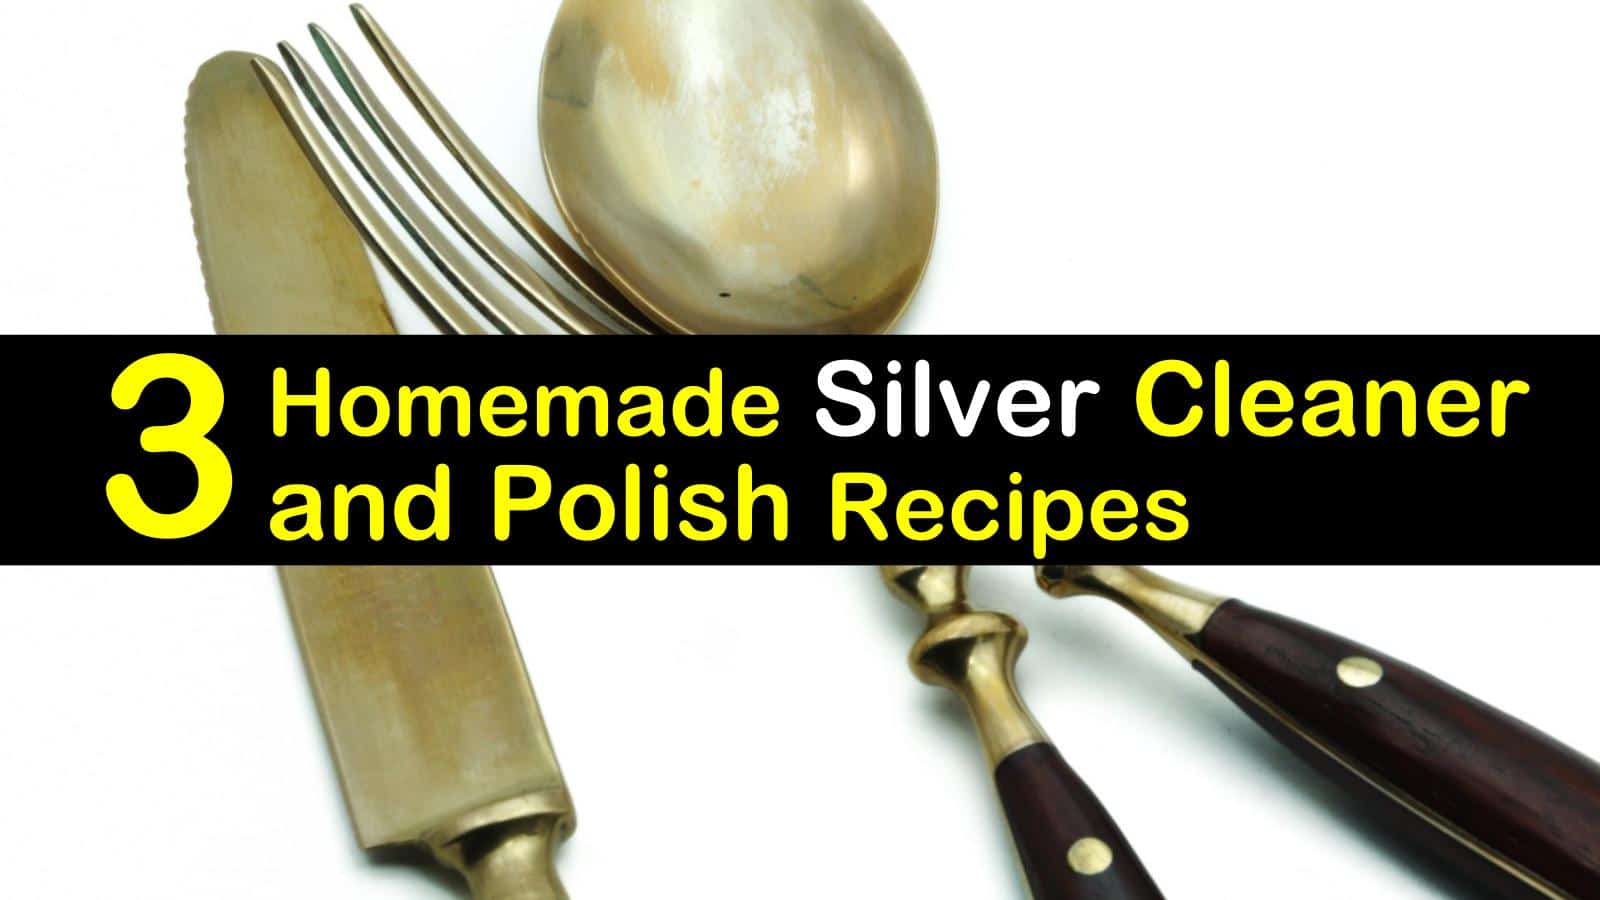 homemade silver cleaner and polish titlimg